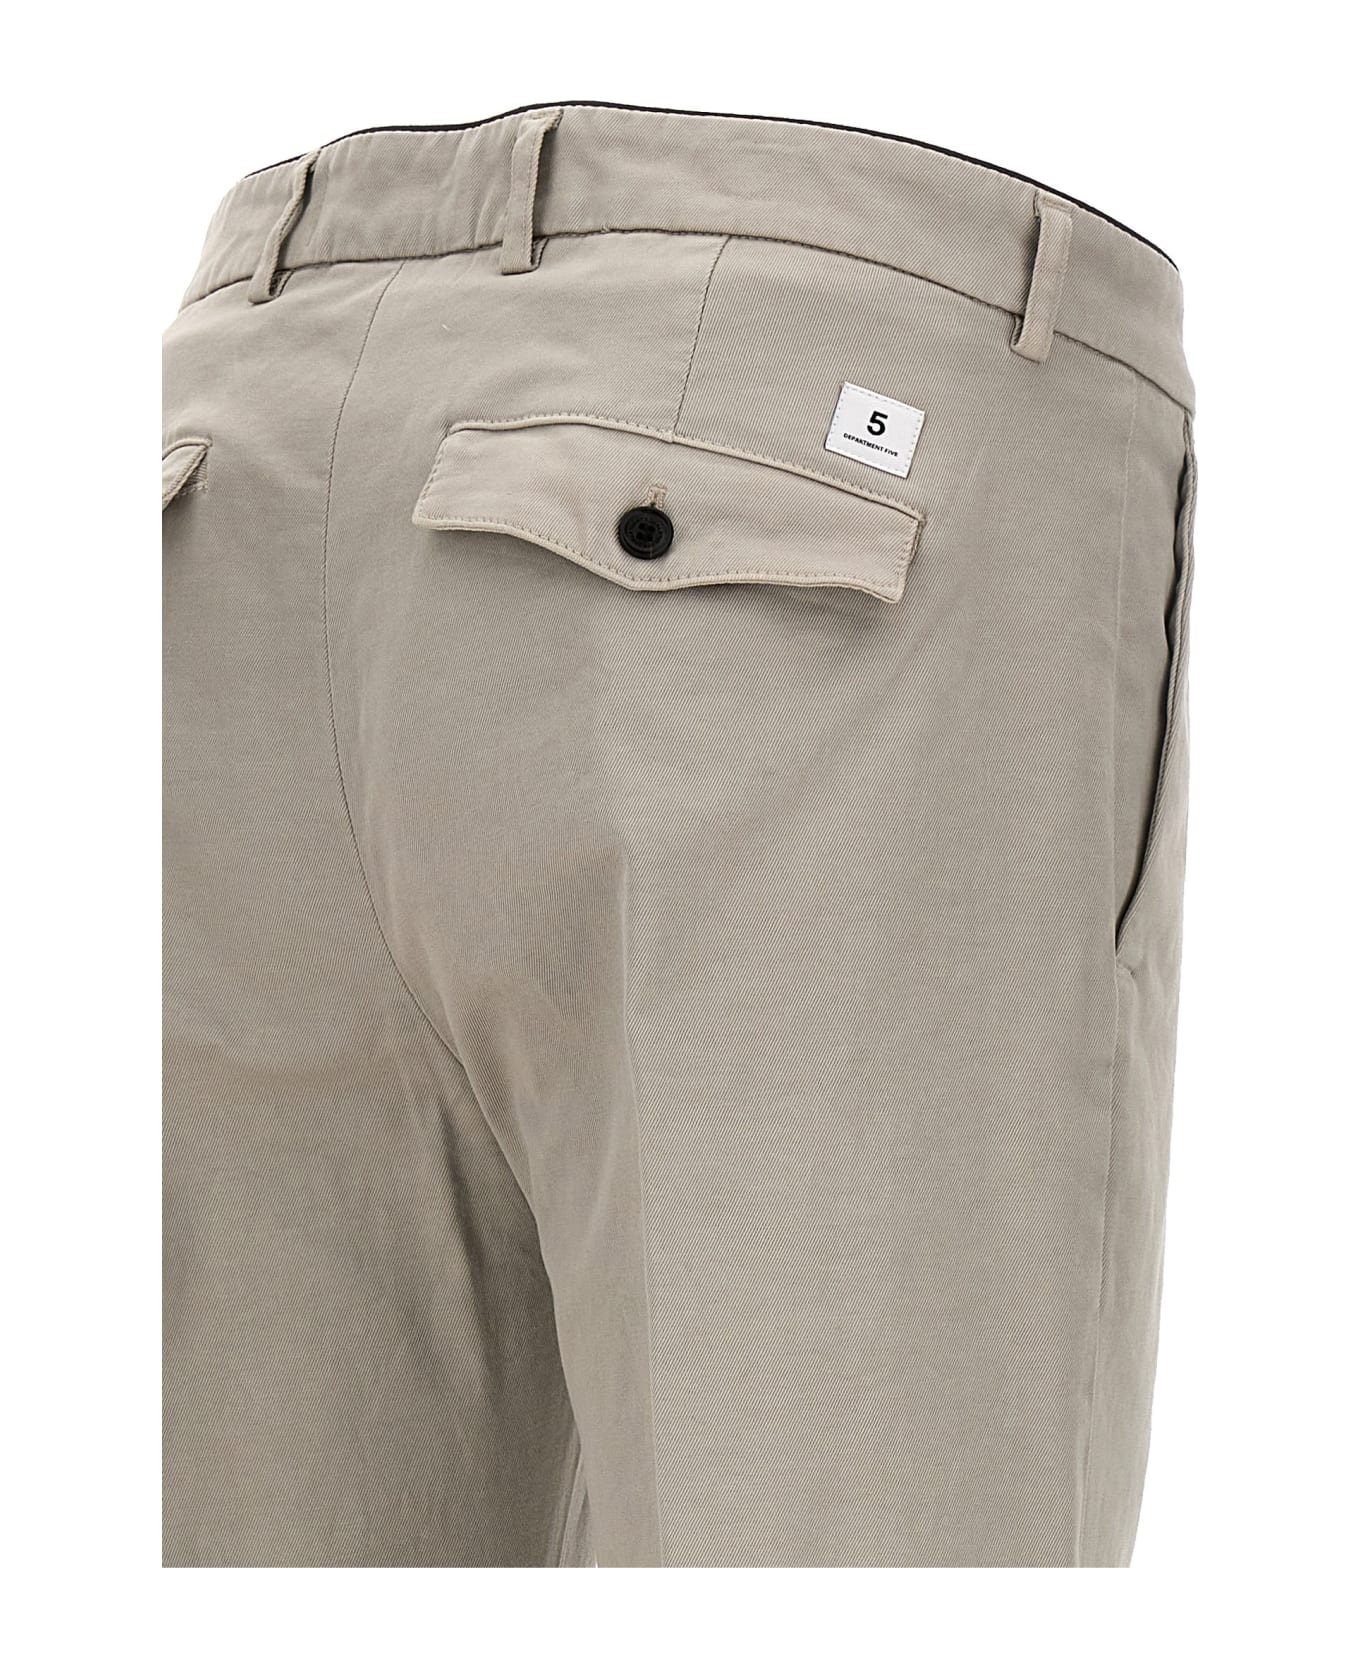 Department Five 'prince' Pants - Beige ボトムス